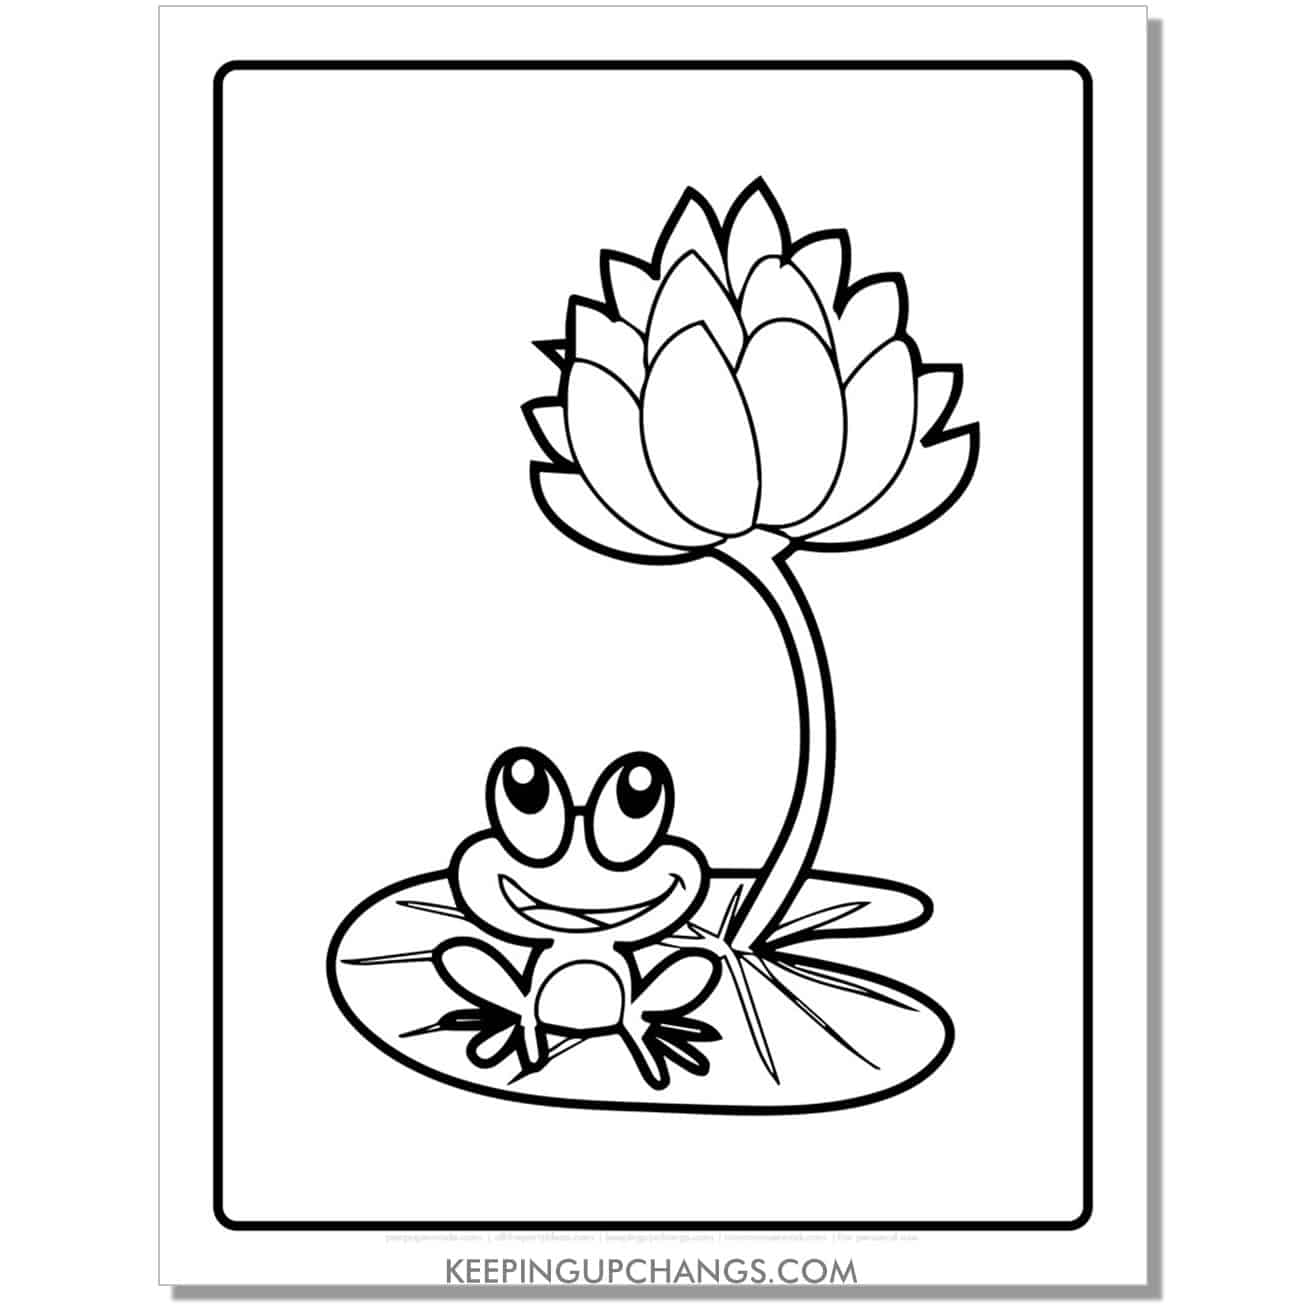 free small baby frog coloring page, sheet with lotus.